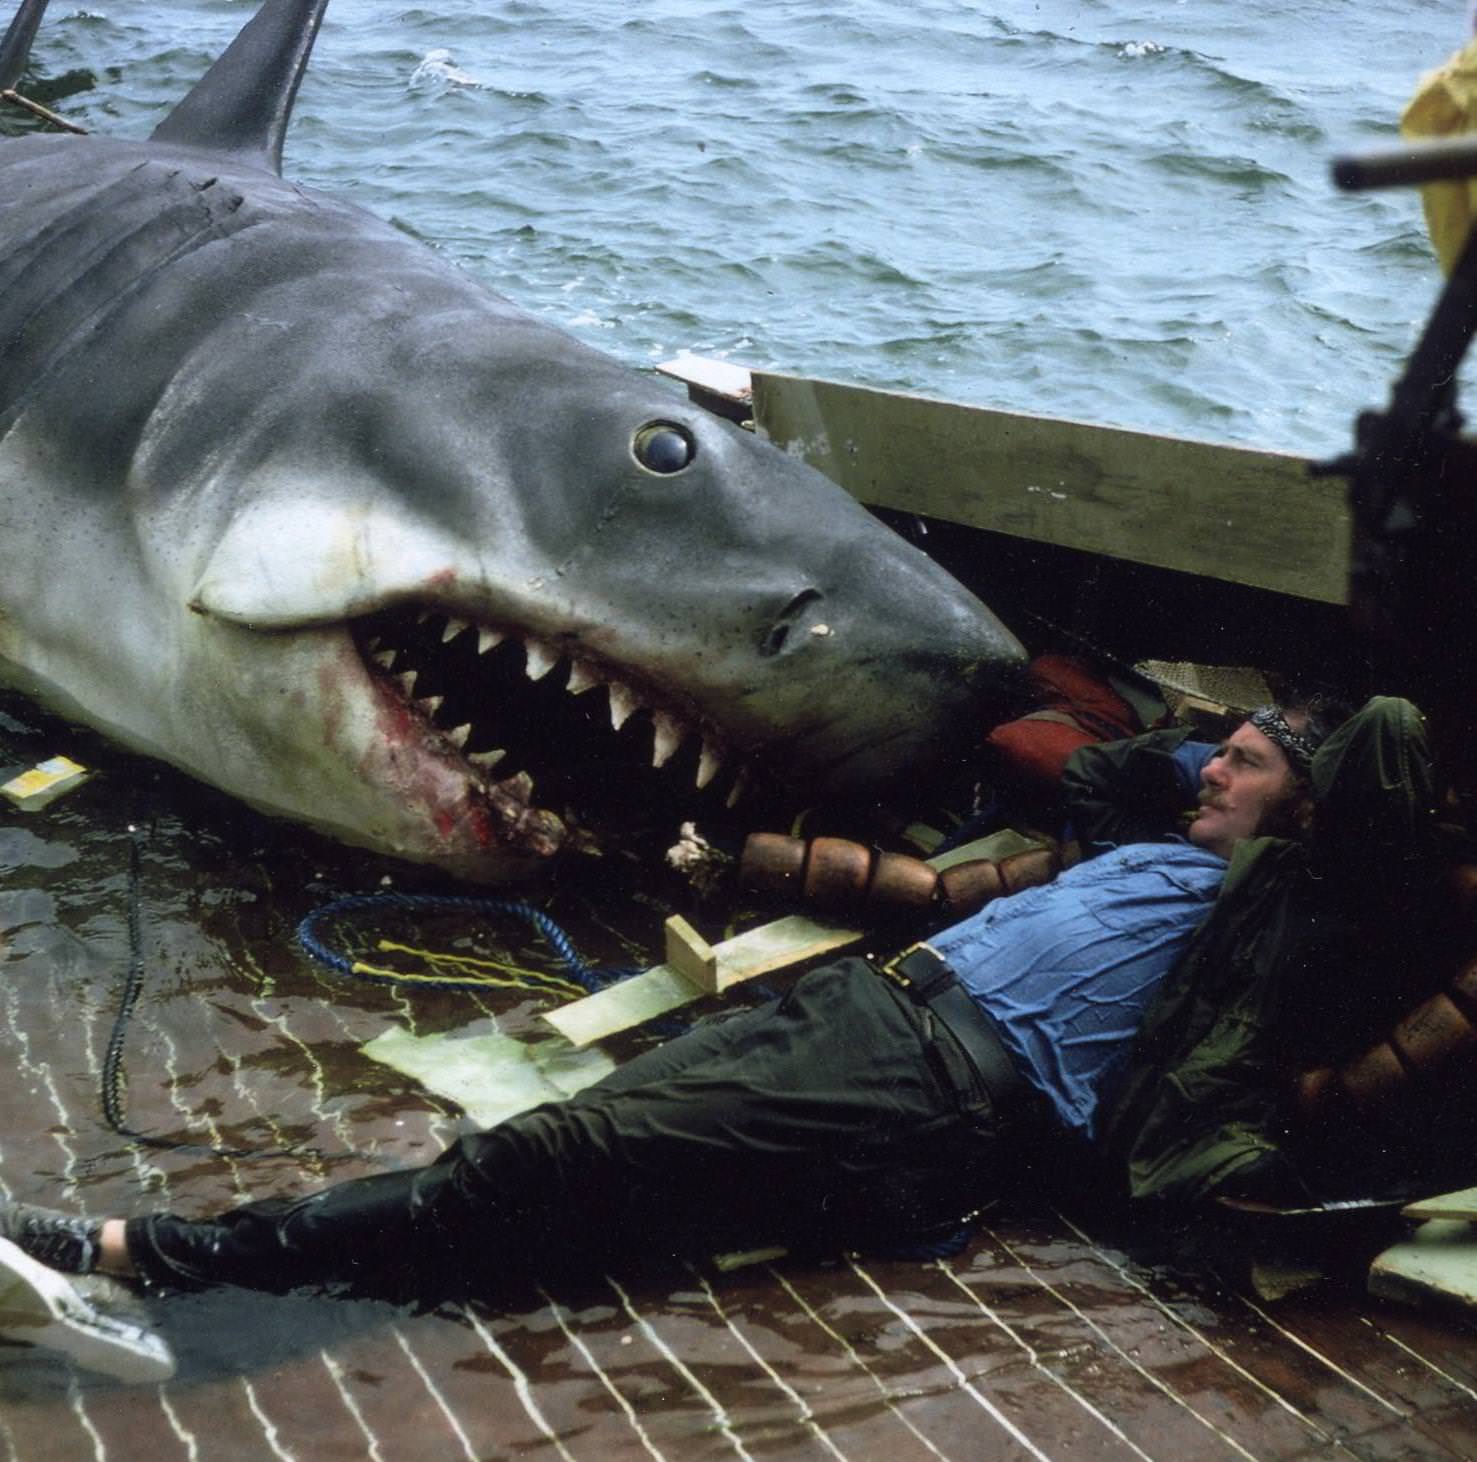 Robert Shaw relaxes on the set of Jaws, while filming the scene in which Quint is eaten by the shark, 1974